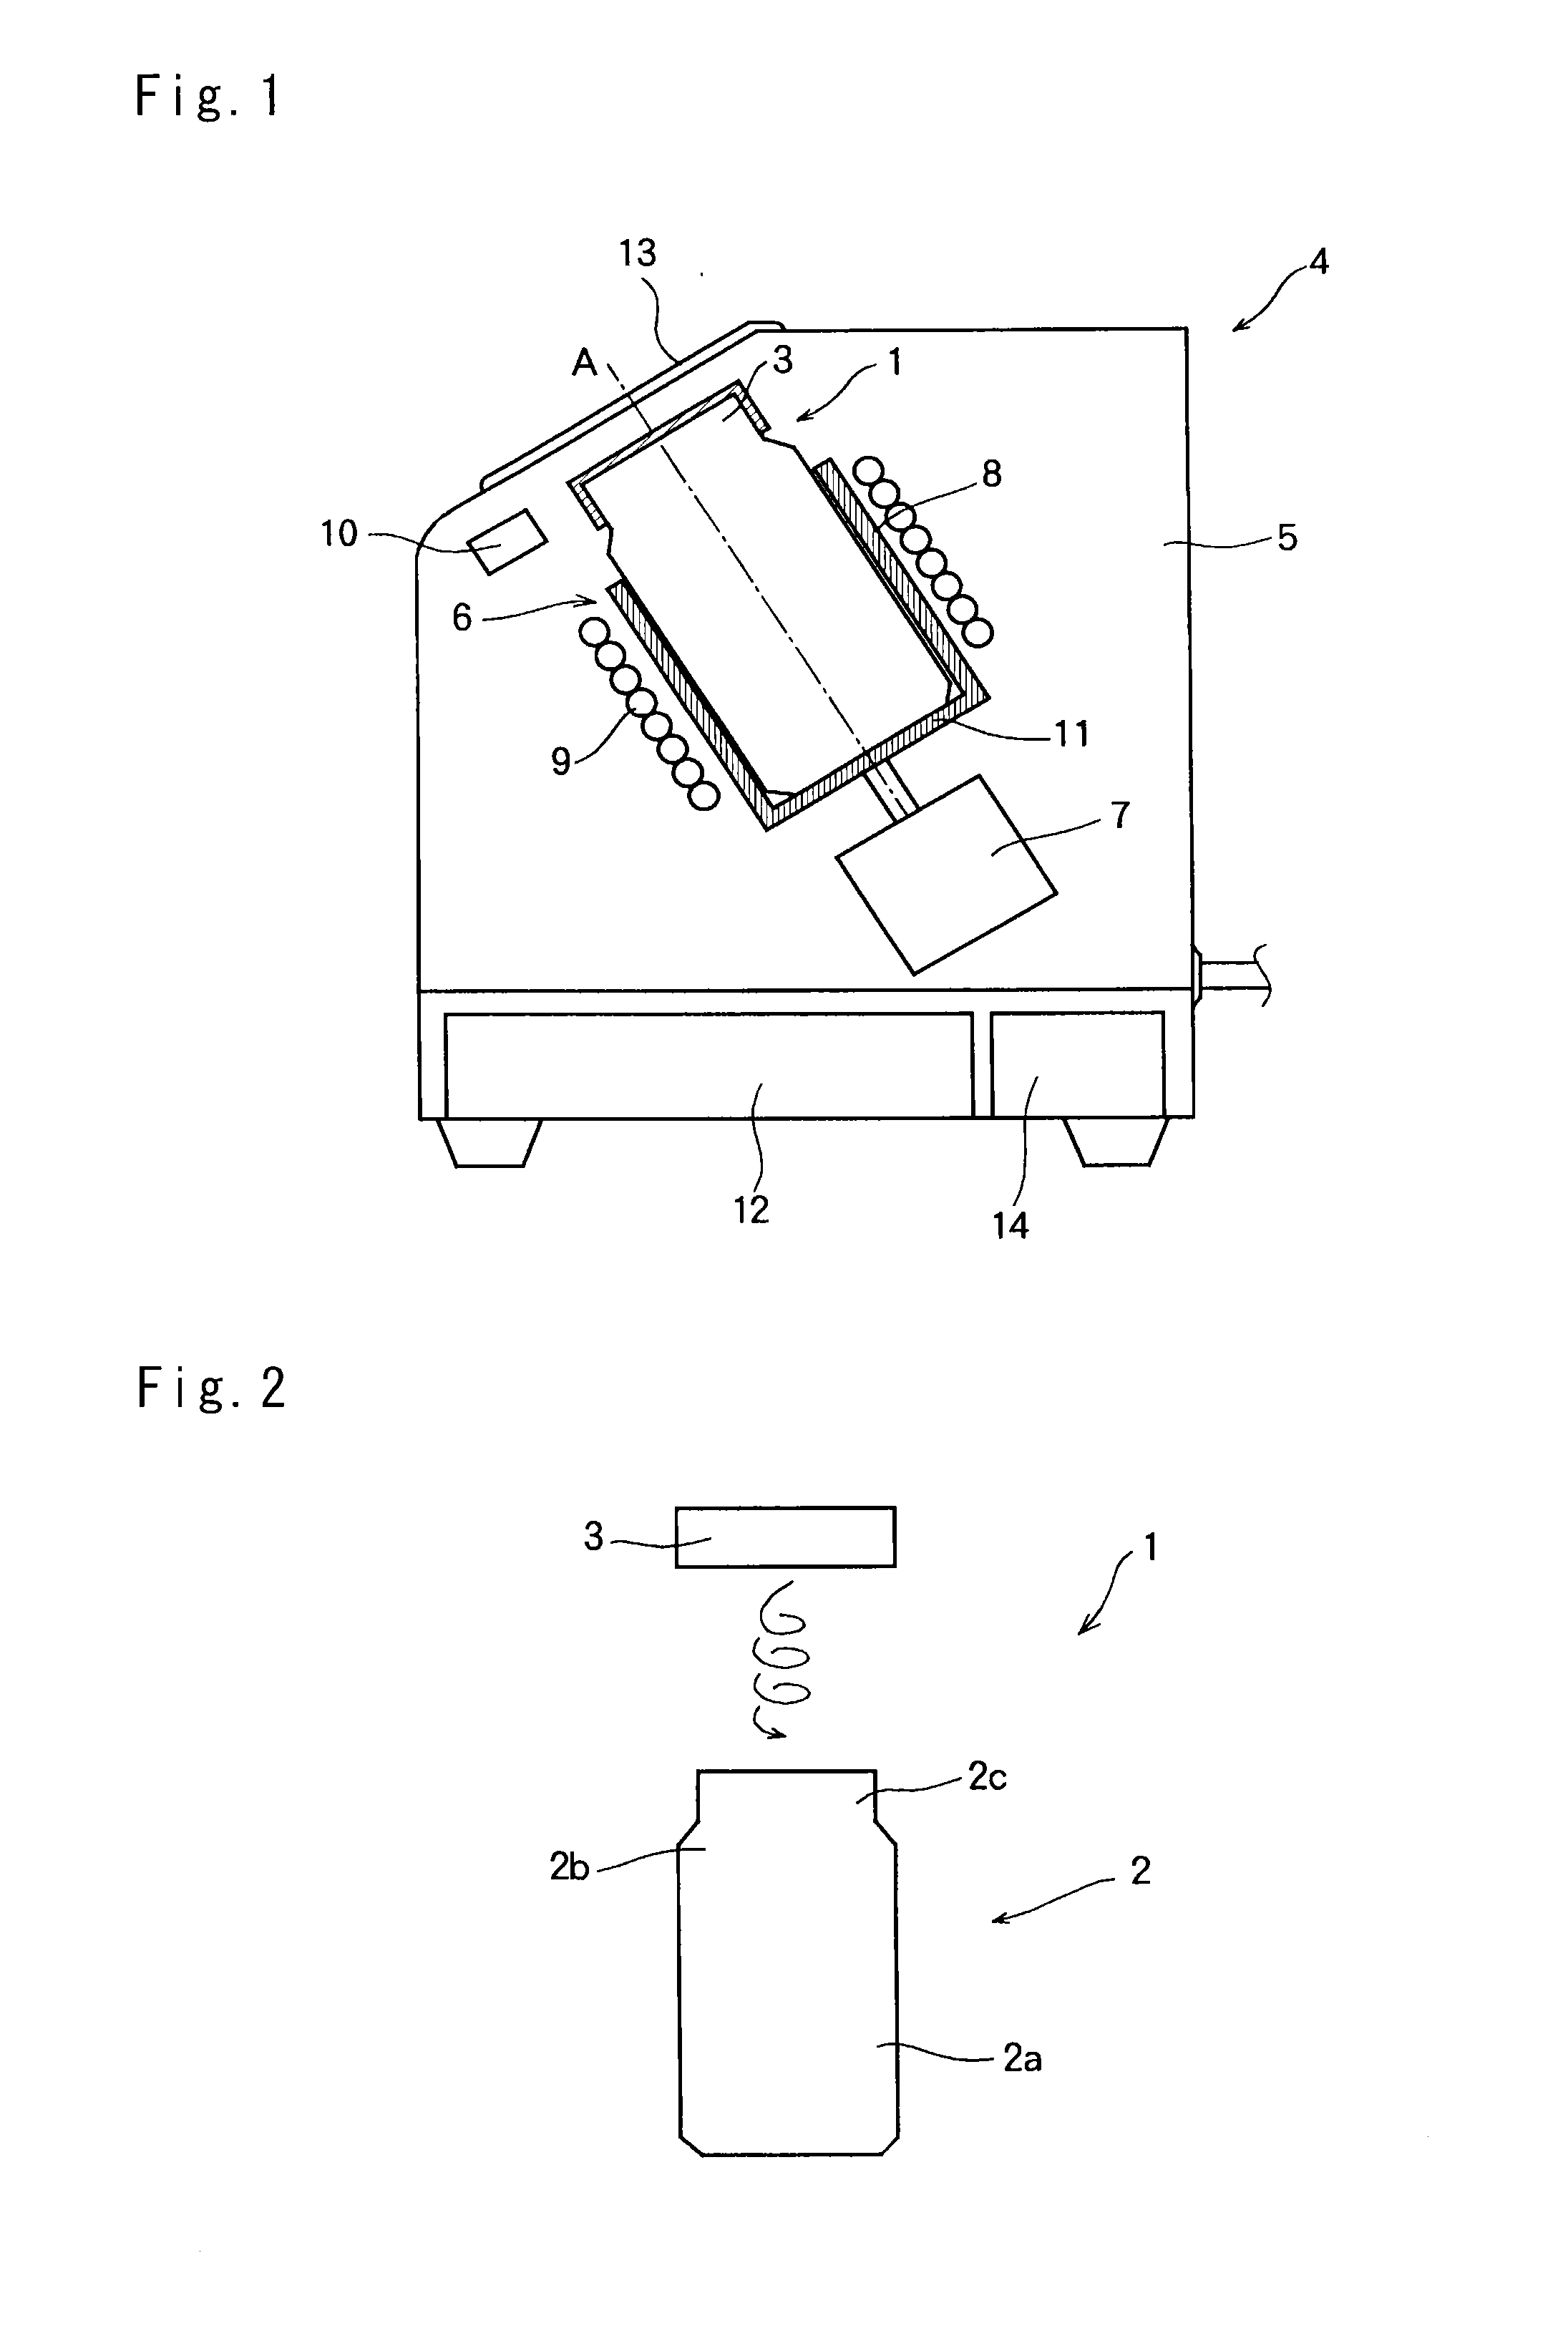 Induction heating apparatus for a beverage can